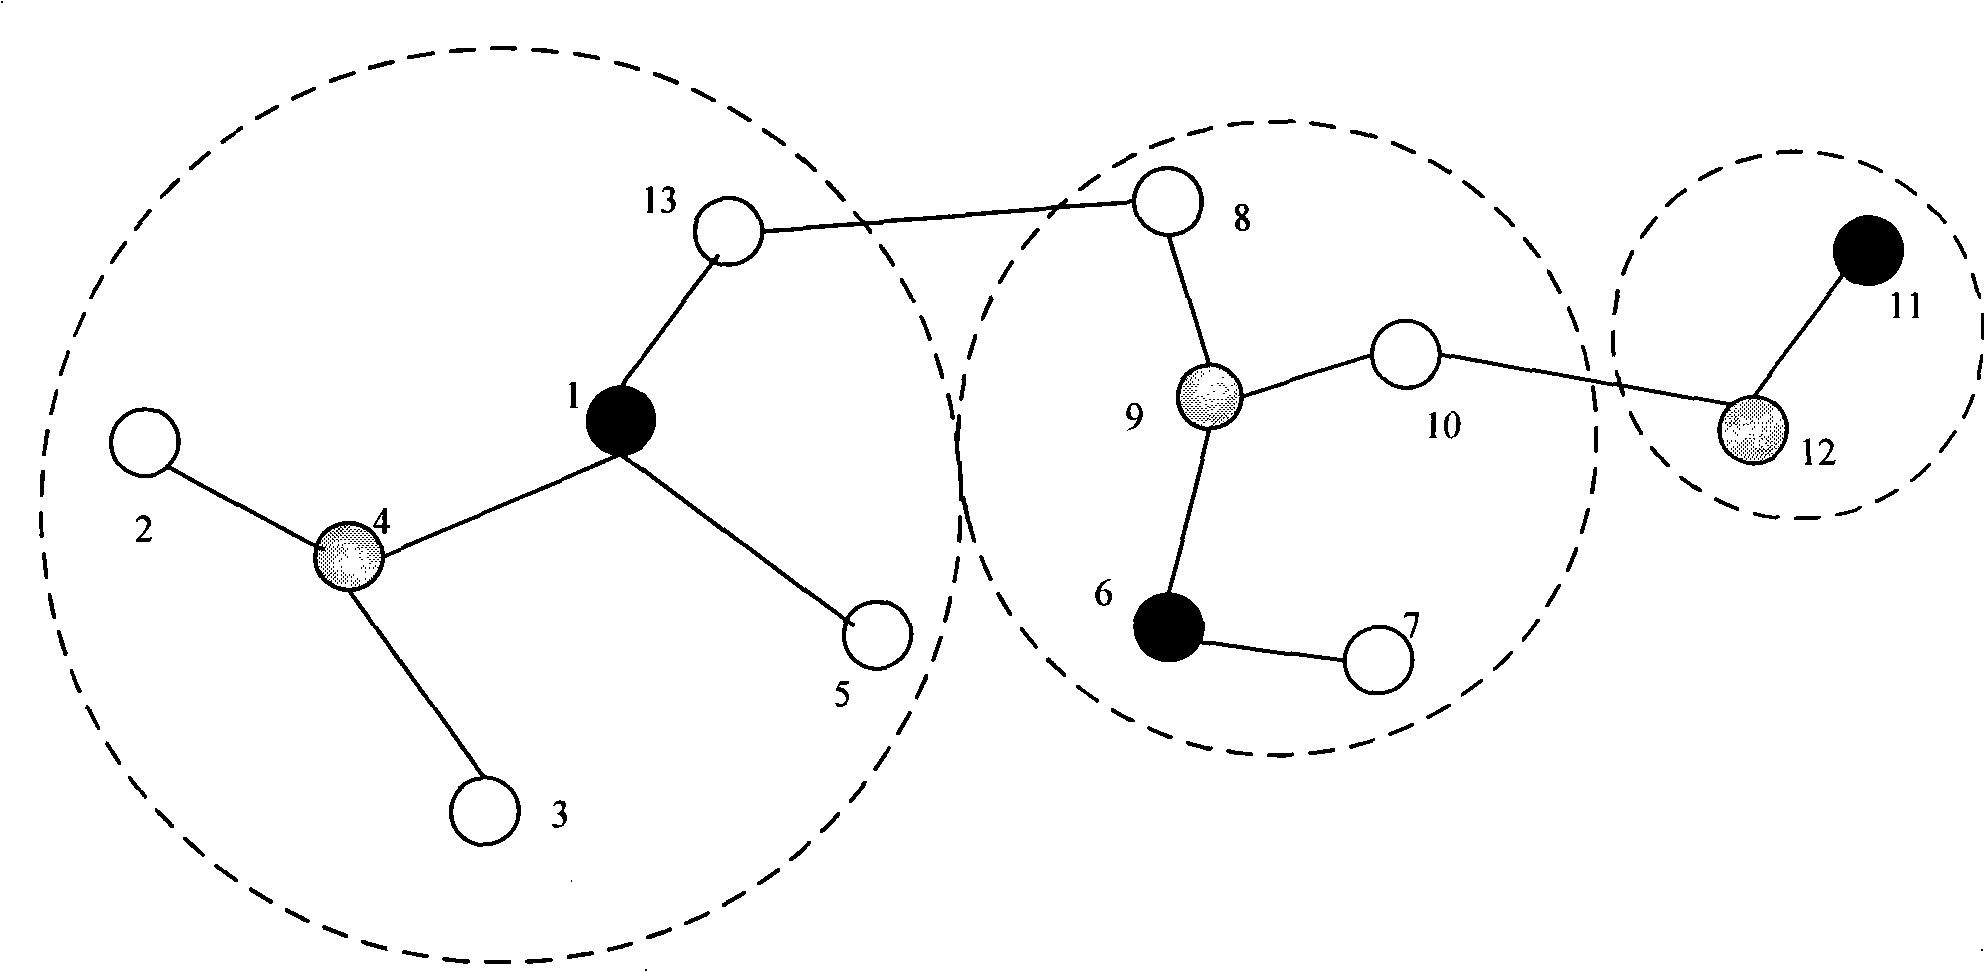 An assister-based clustering method in Ad Hoc network